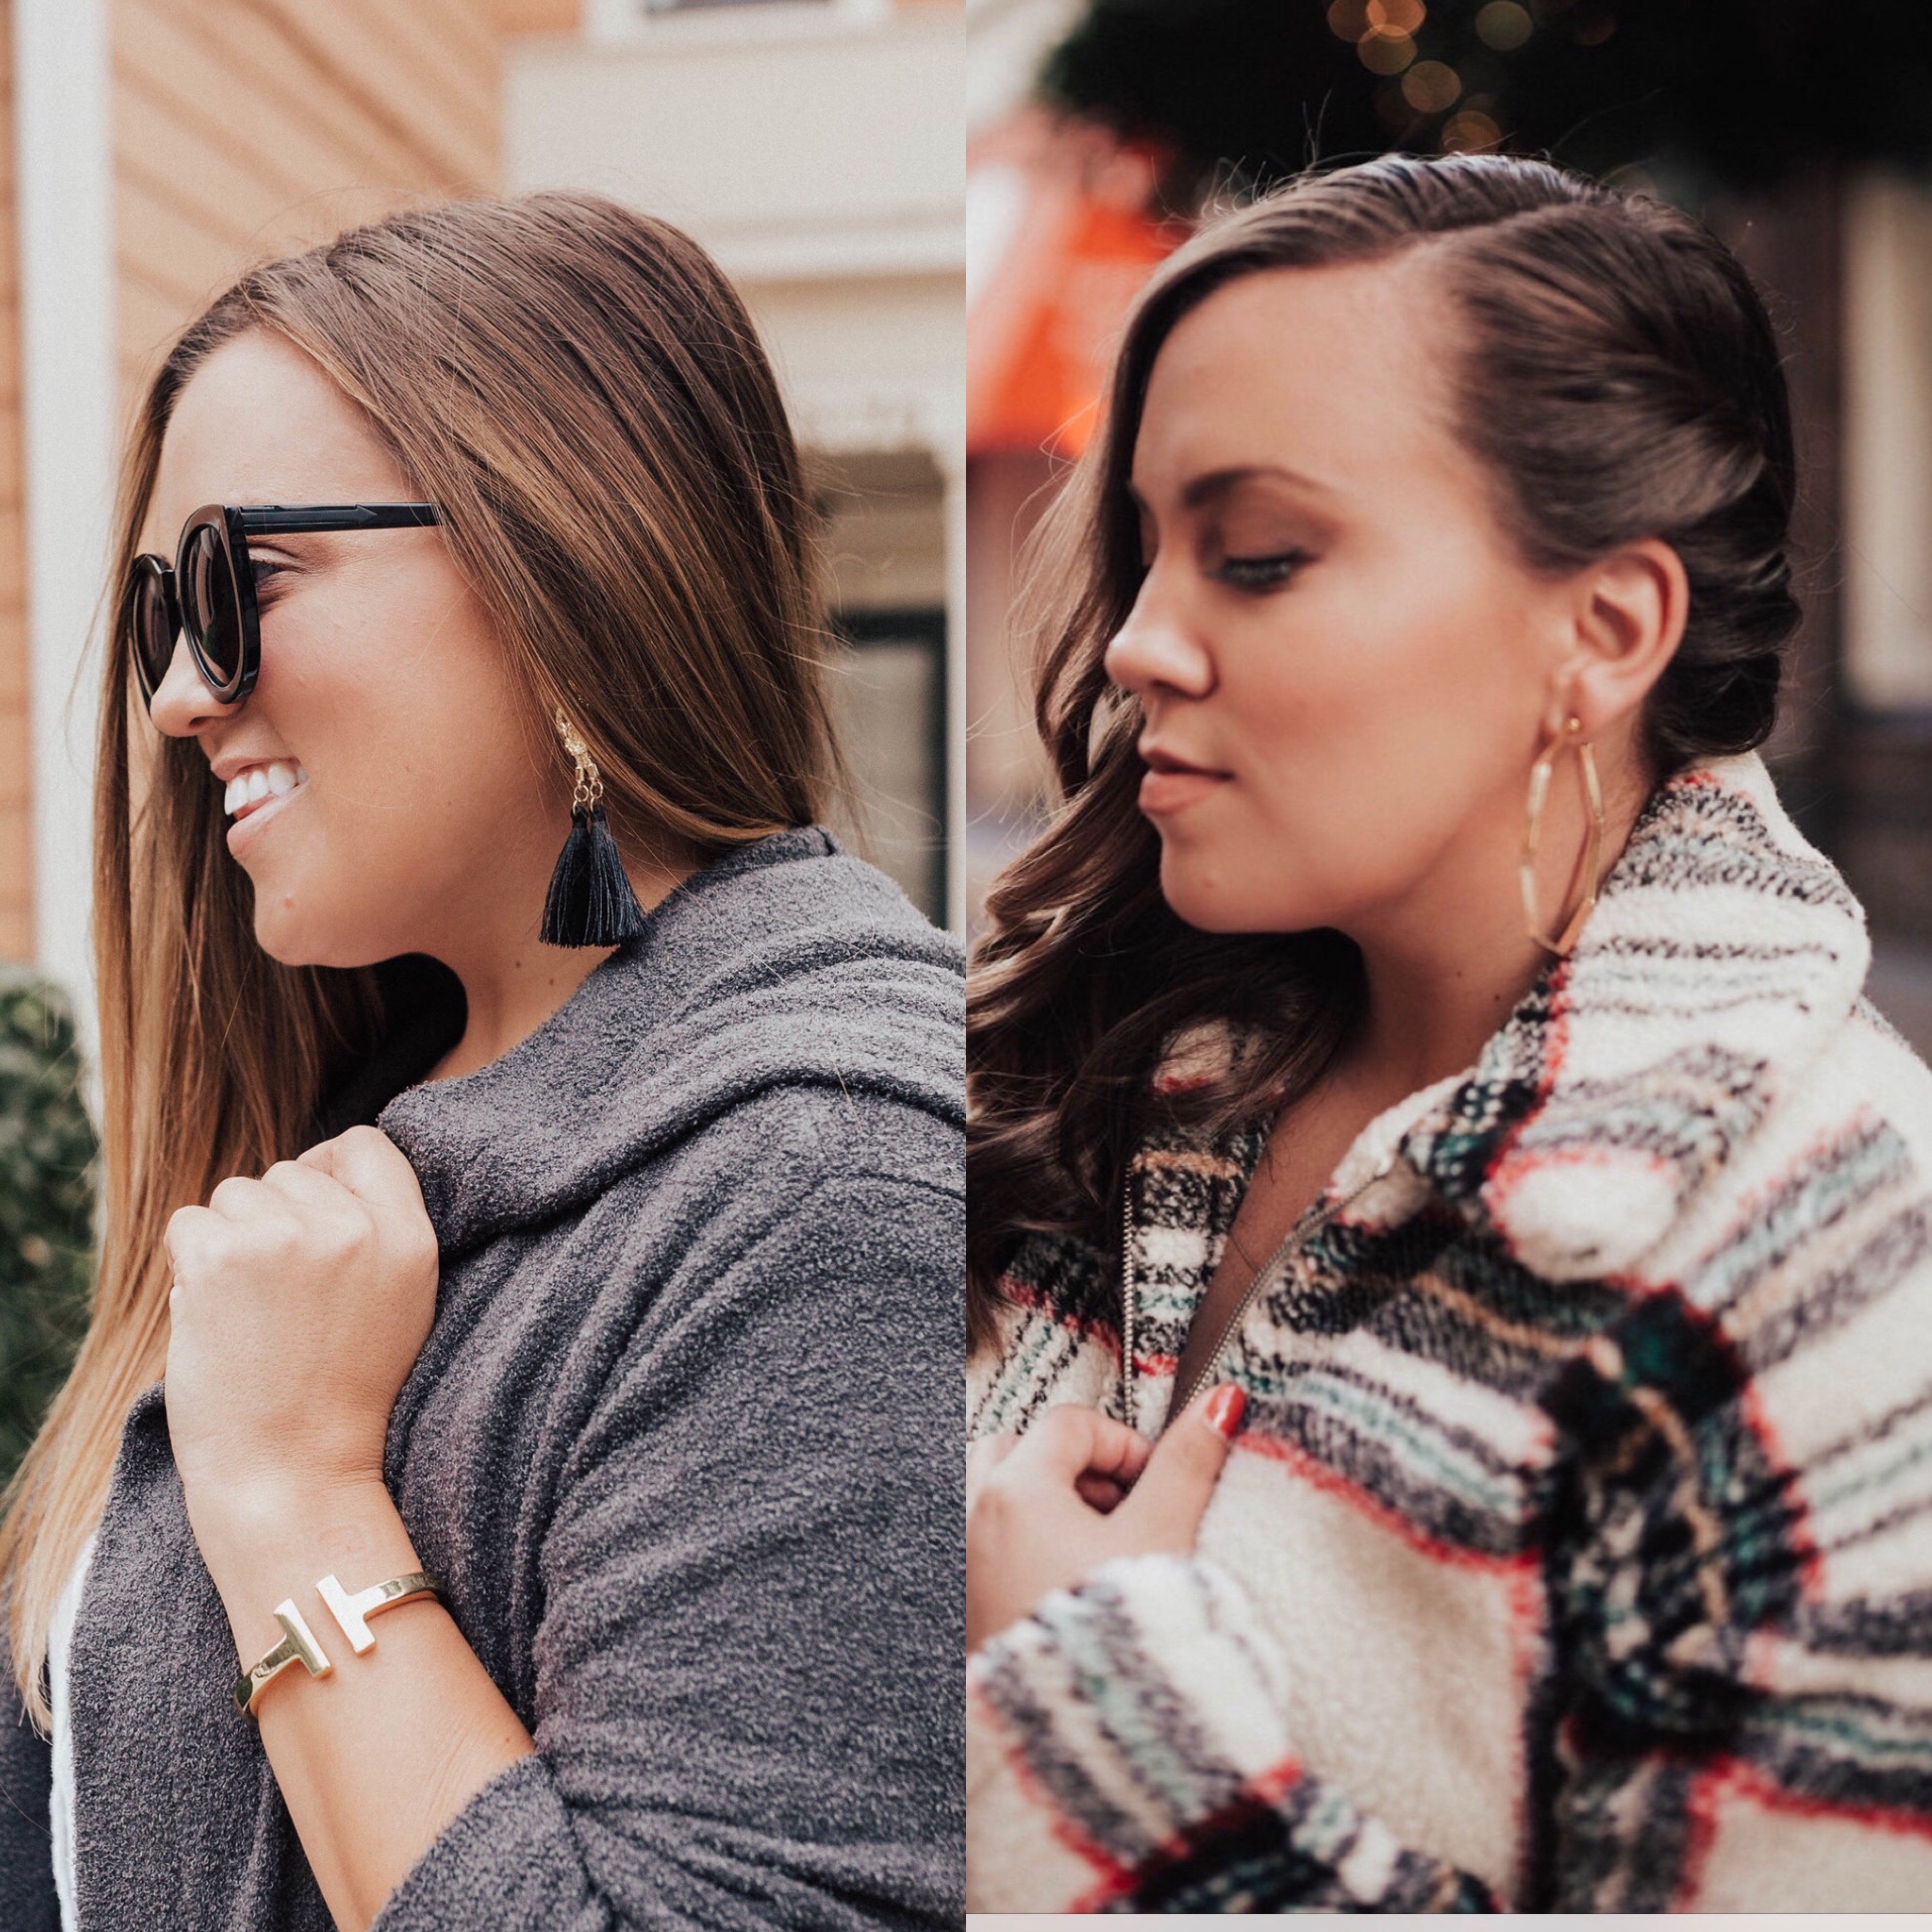 San Francisco Blogger, Ashley Zeal, from Two Peas in a Prada shares her results from her Kybella treatments at SkinSpirit Palo Alto. Head to the blog for before and after photos!